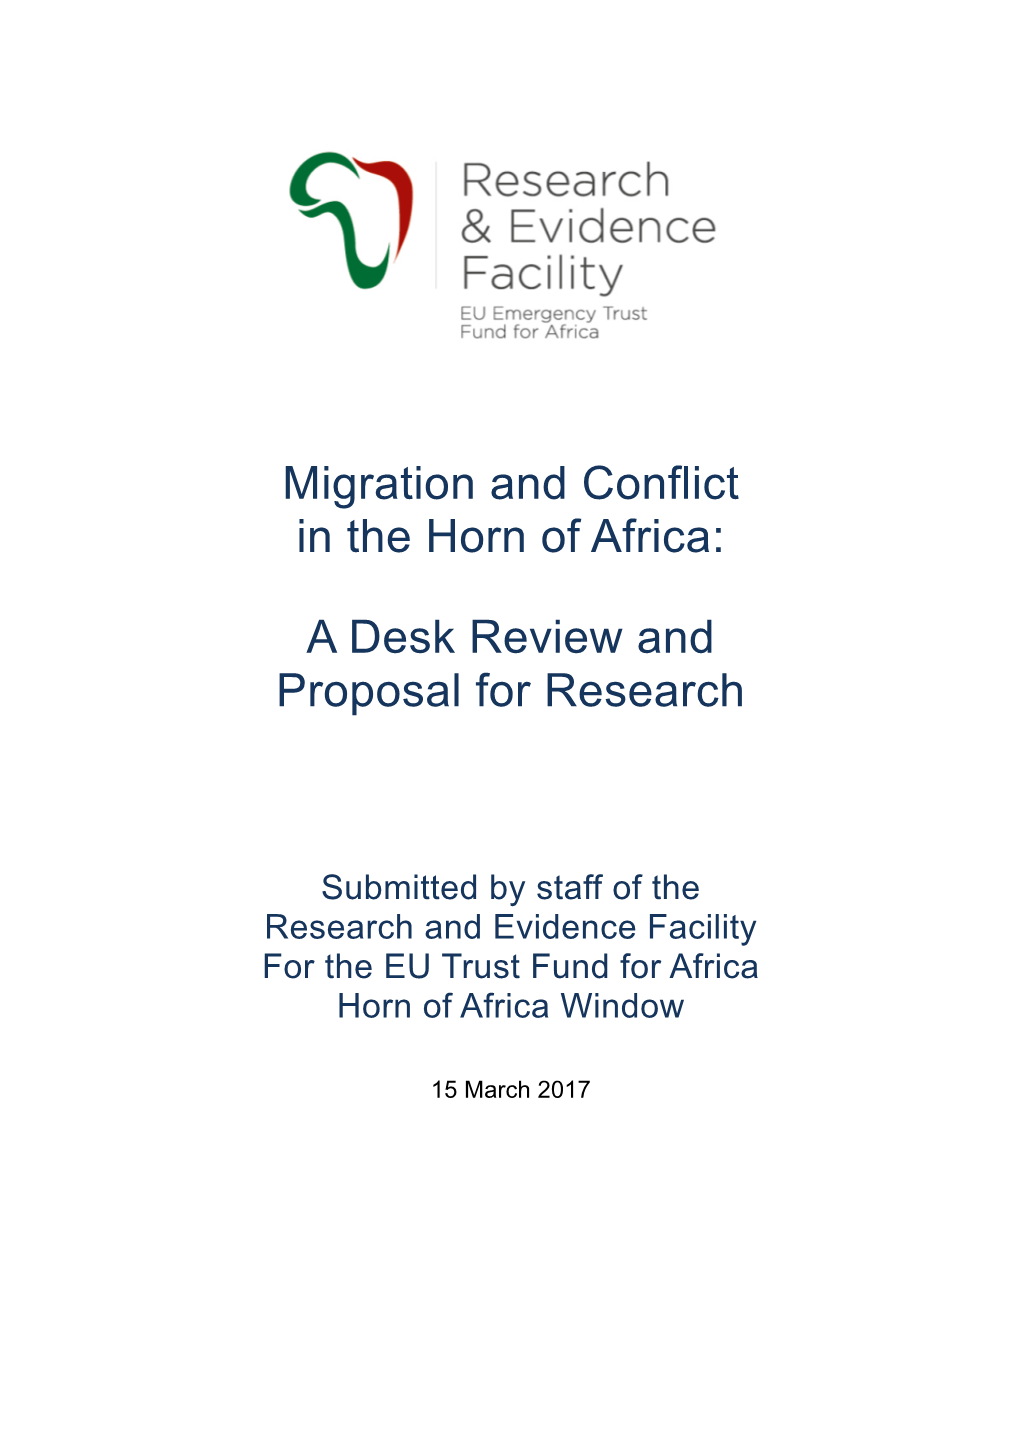 Migration and Conflict in the Horn of Africa